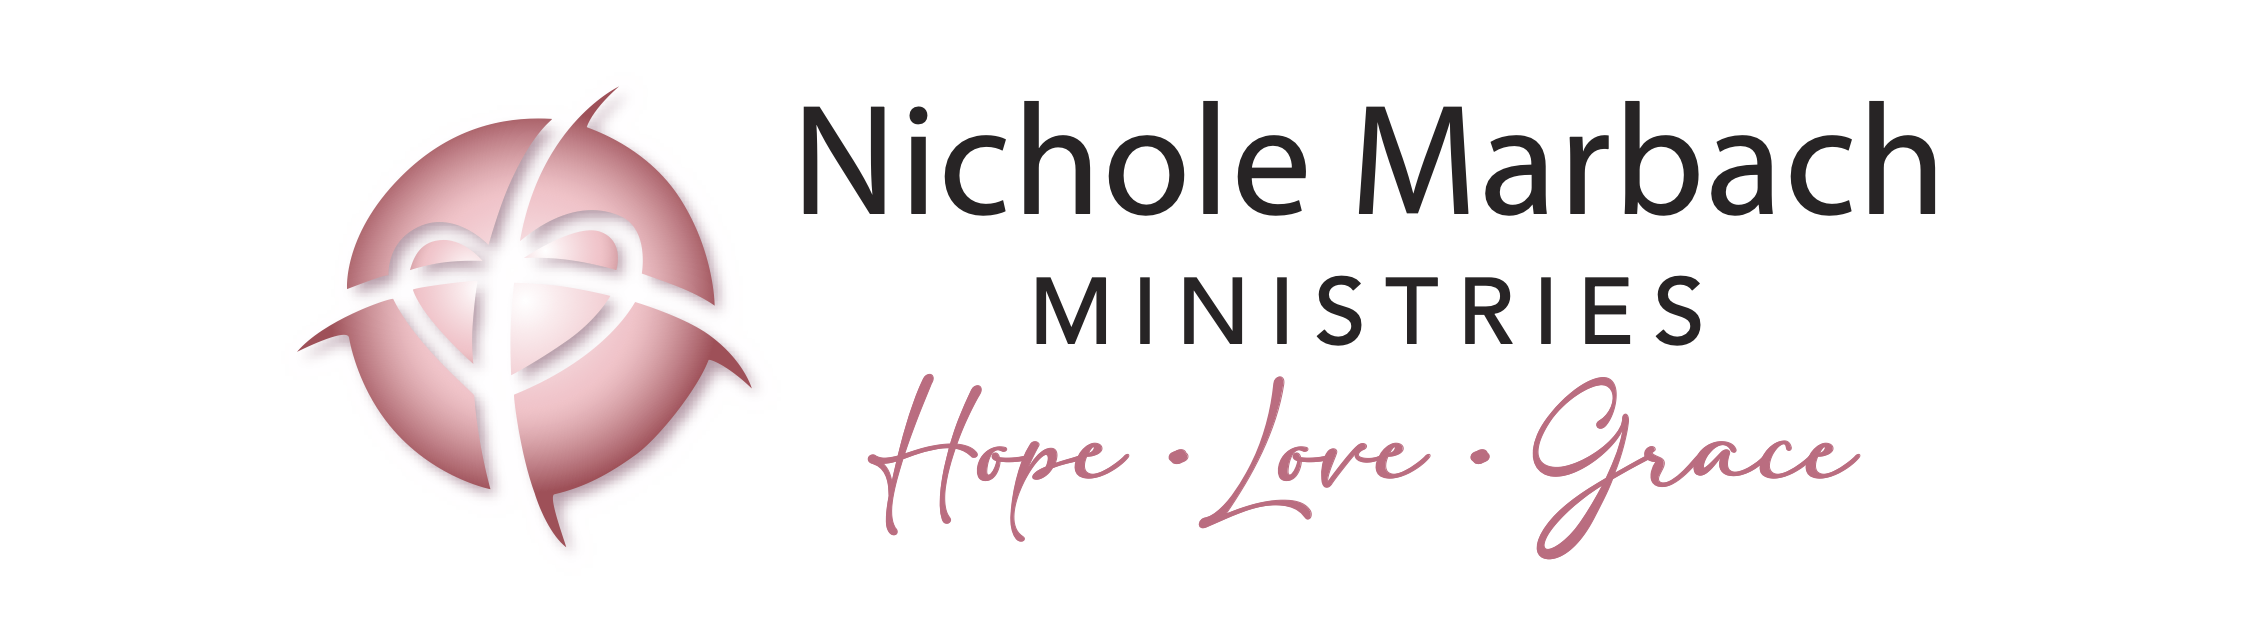 Nichole Marbach Ministries. Spreading the Love and Grace of God Around the World.